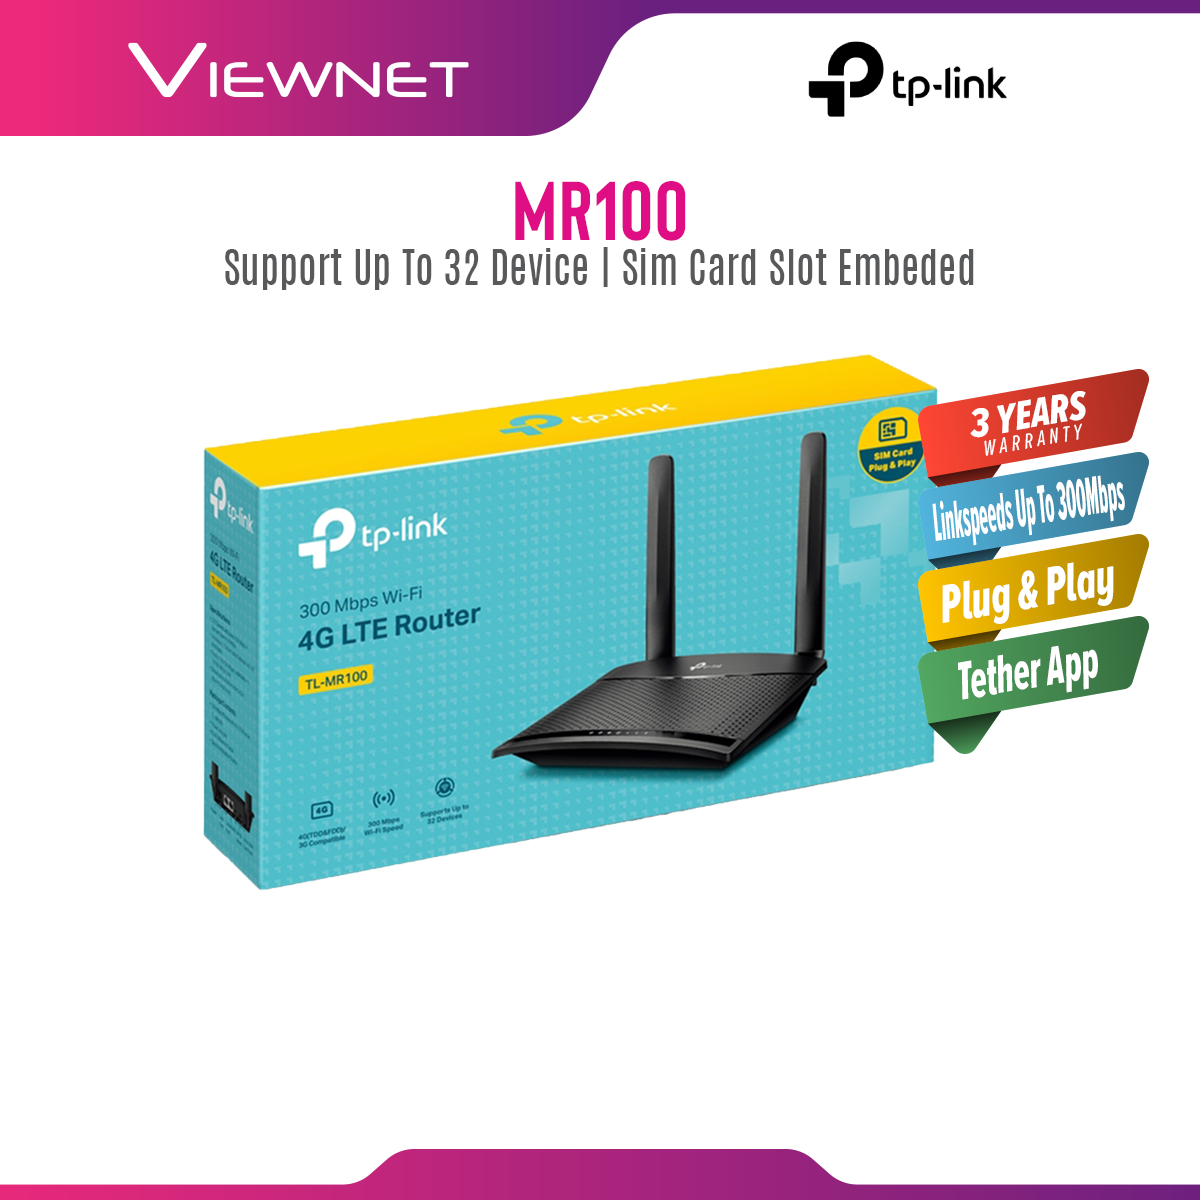 TP-Link ARCHER TL-MR100 Wireless 4G LTE WiFi SIM Router, 300MBPS, (Support Digi/Maxis/Celcom/YES/Umobile/UNIFI) MR100